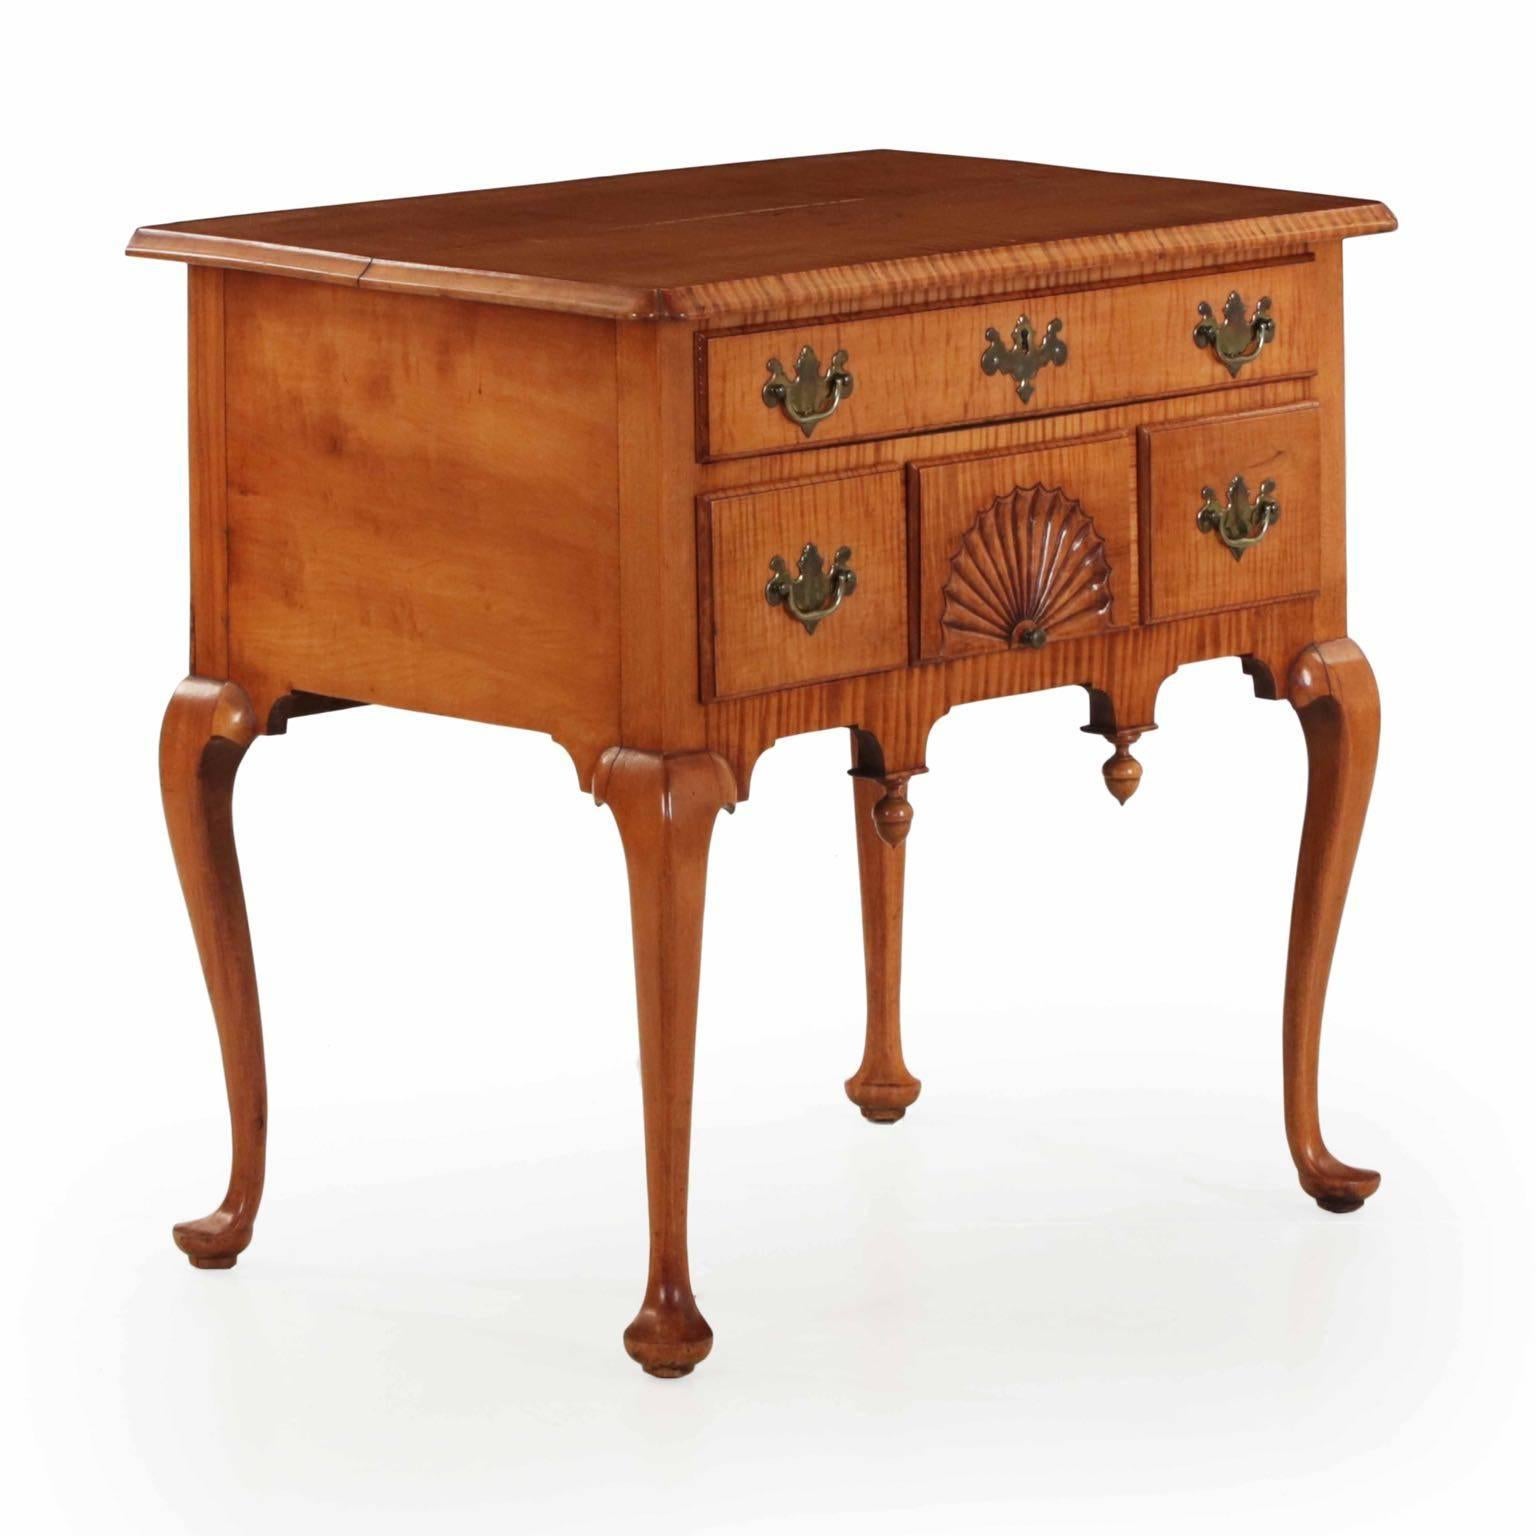 An incredibly striking lowboy from the last quarter of the 19th century, it is carefully bench made and closely inspired by the original forms of Connecticut. The case is crafted of solid tiger maple, the vibrant rays fully on display in the cut of